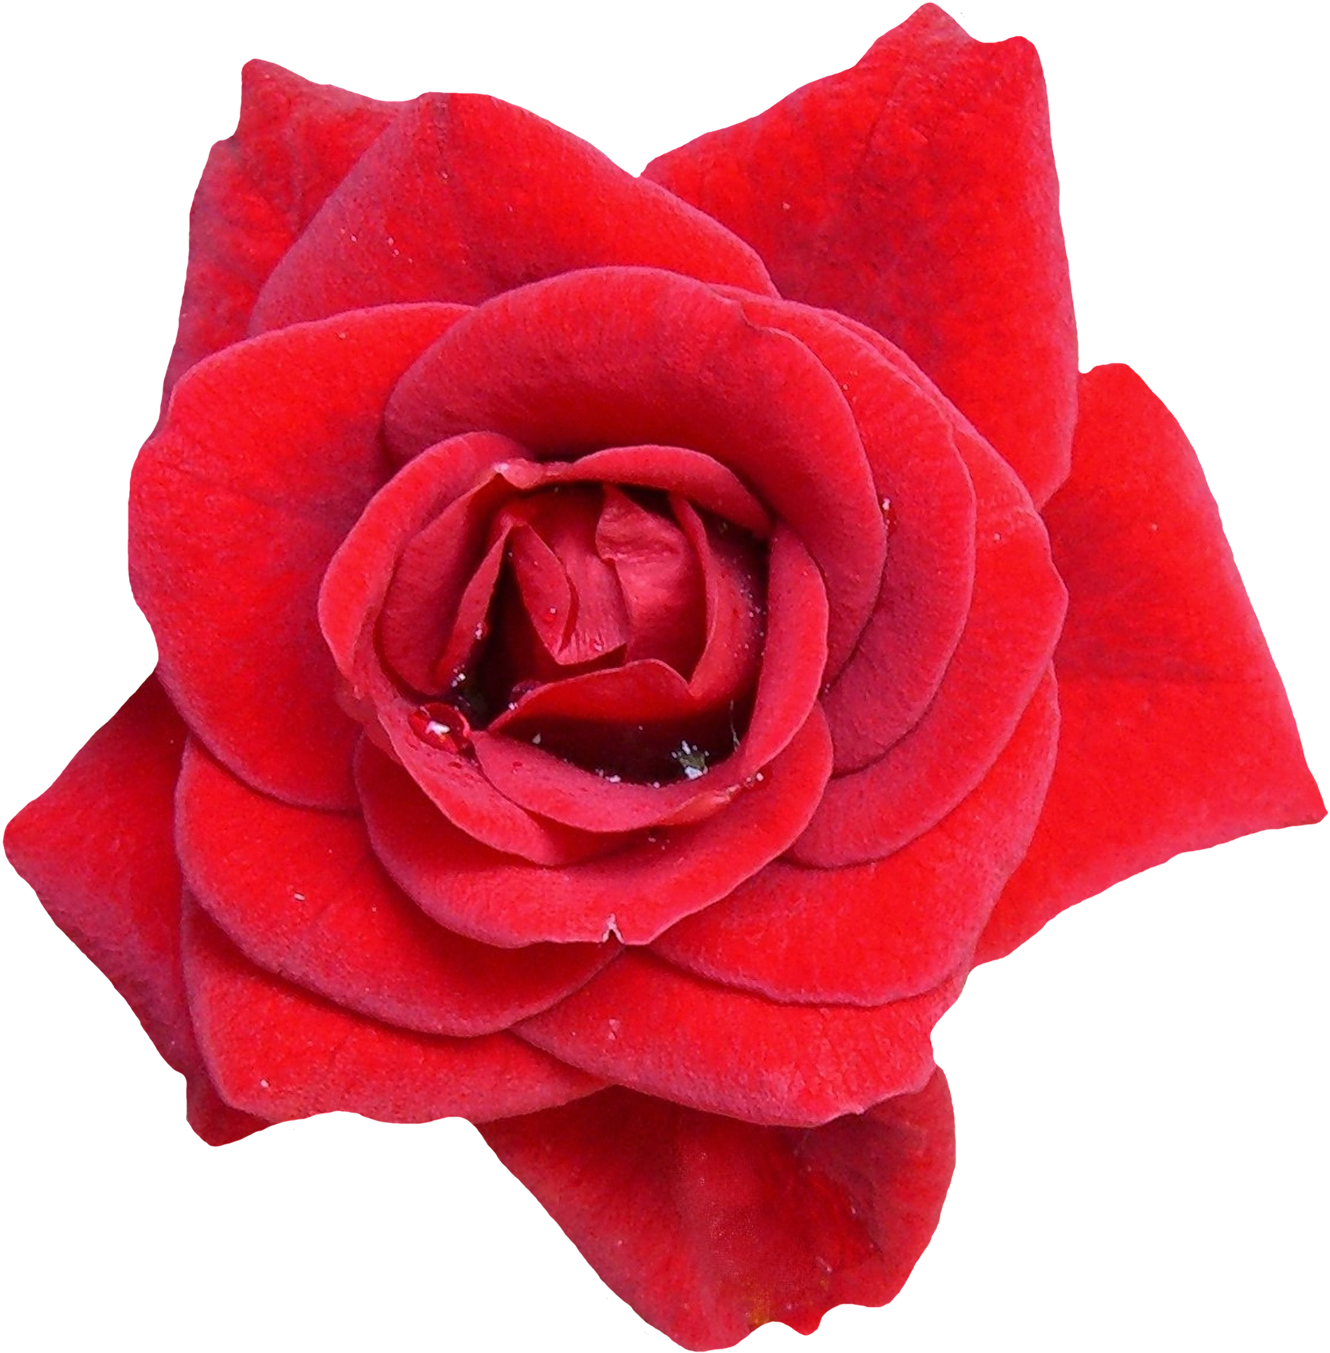 Red Rose Flower Png Image Purepng Free Transpa Cc0 - High Resolution Flower Png (1450x1464)